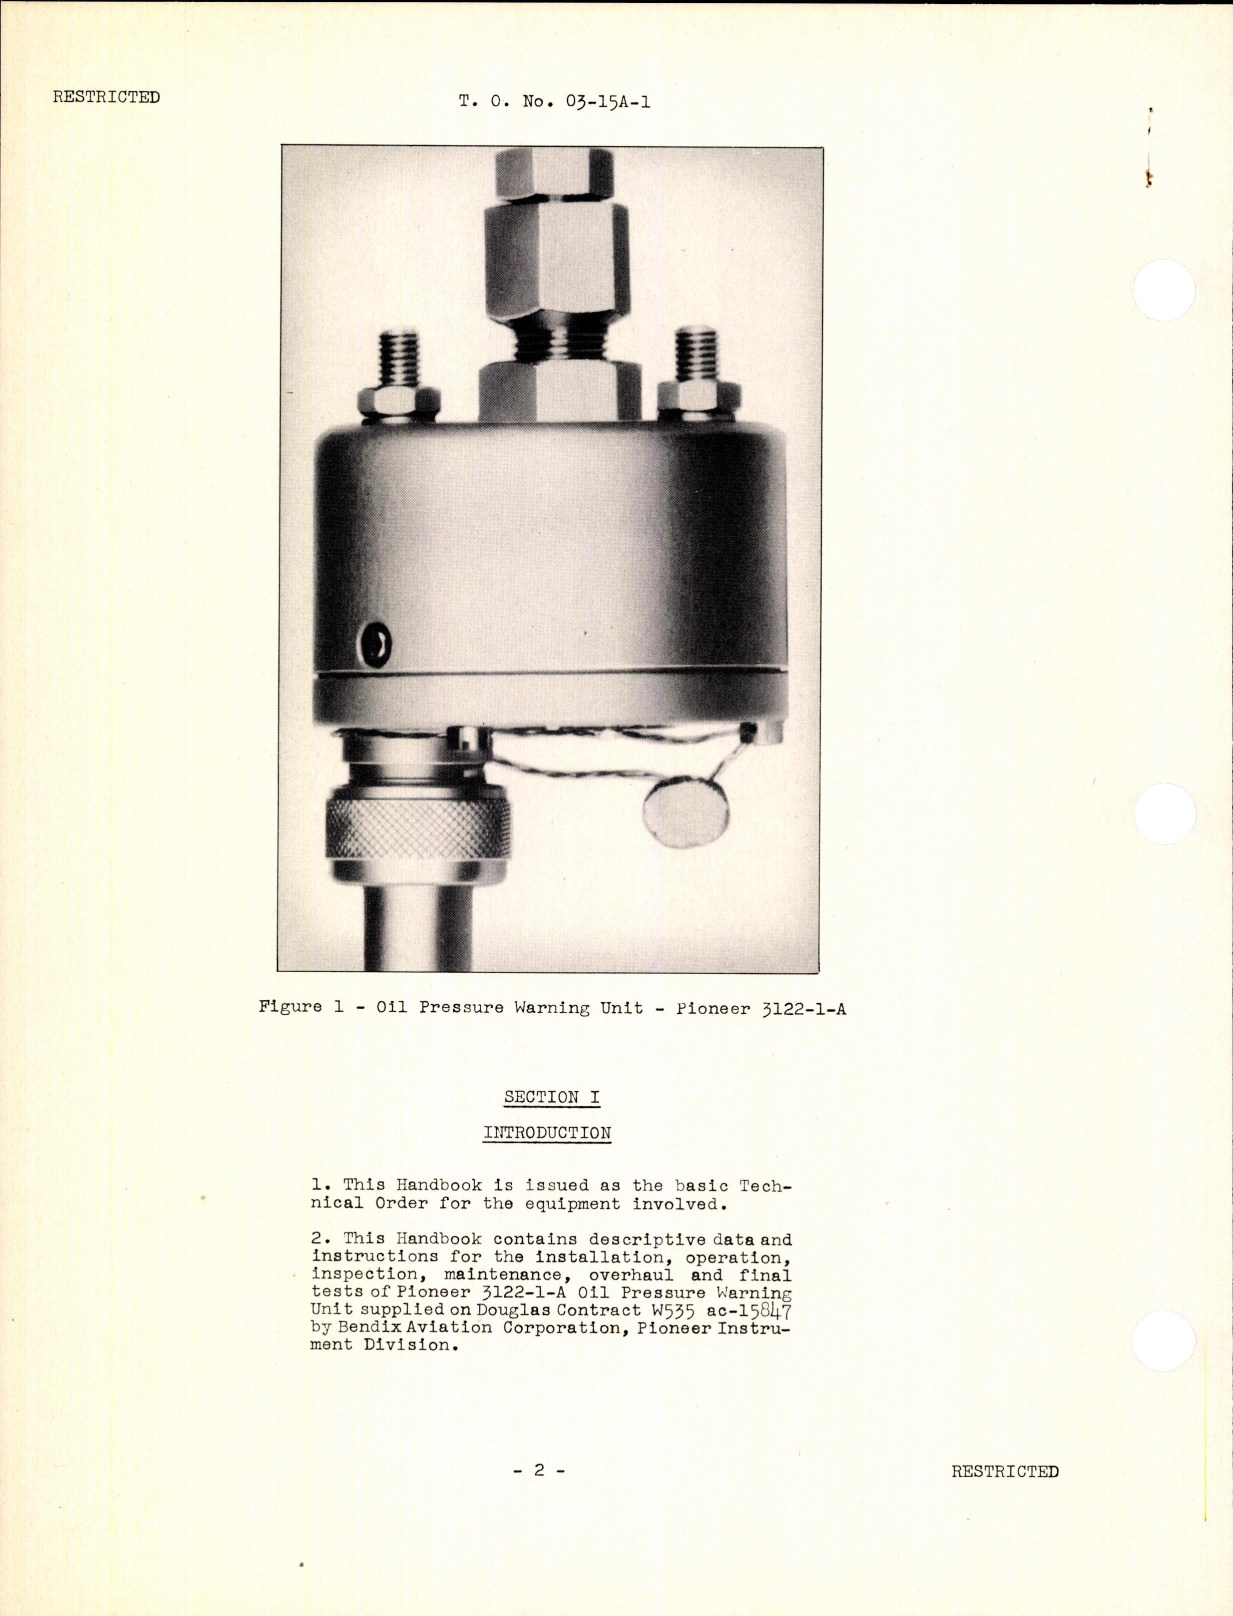 Sample page 4 from AirCorps Library document: Handbook of Instructions w PC for Oil Pressure Warning Unit